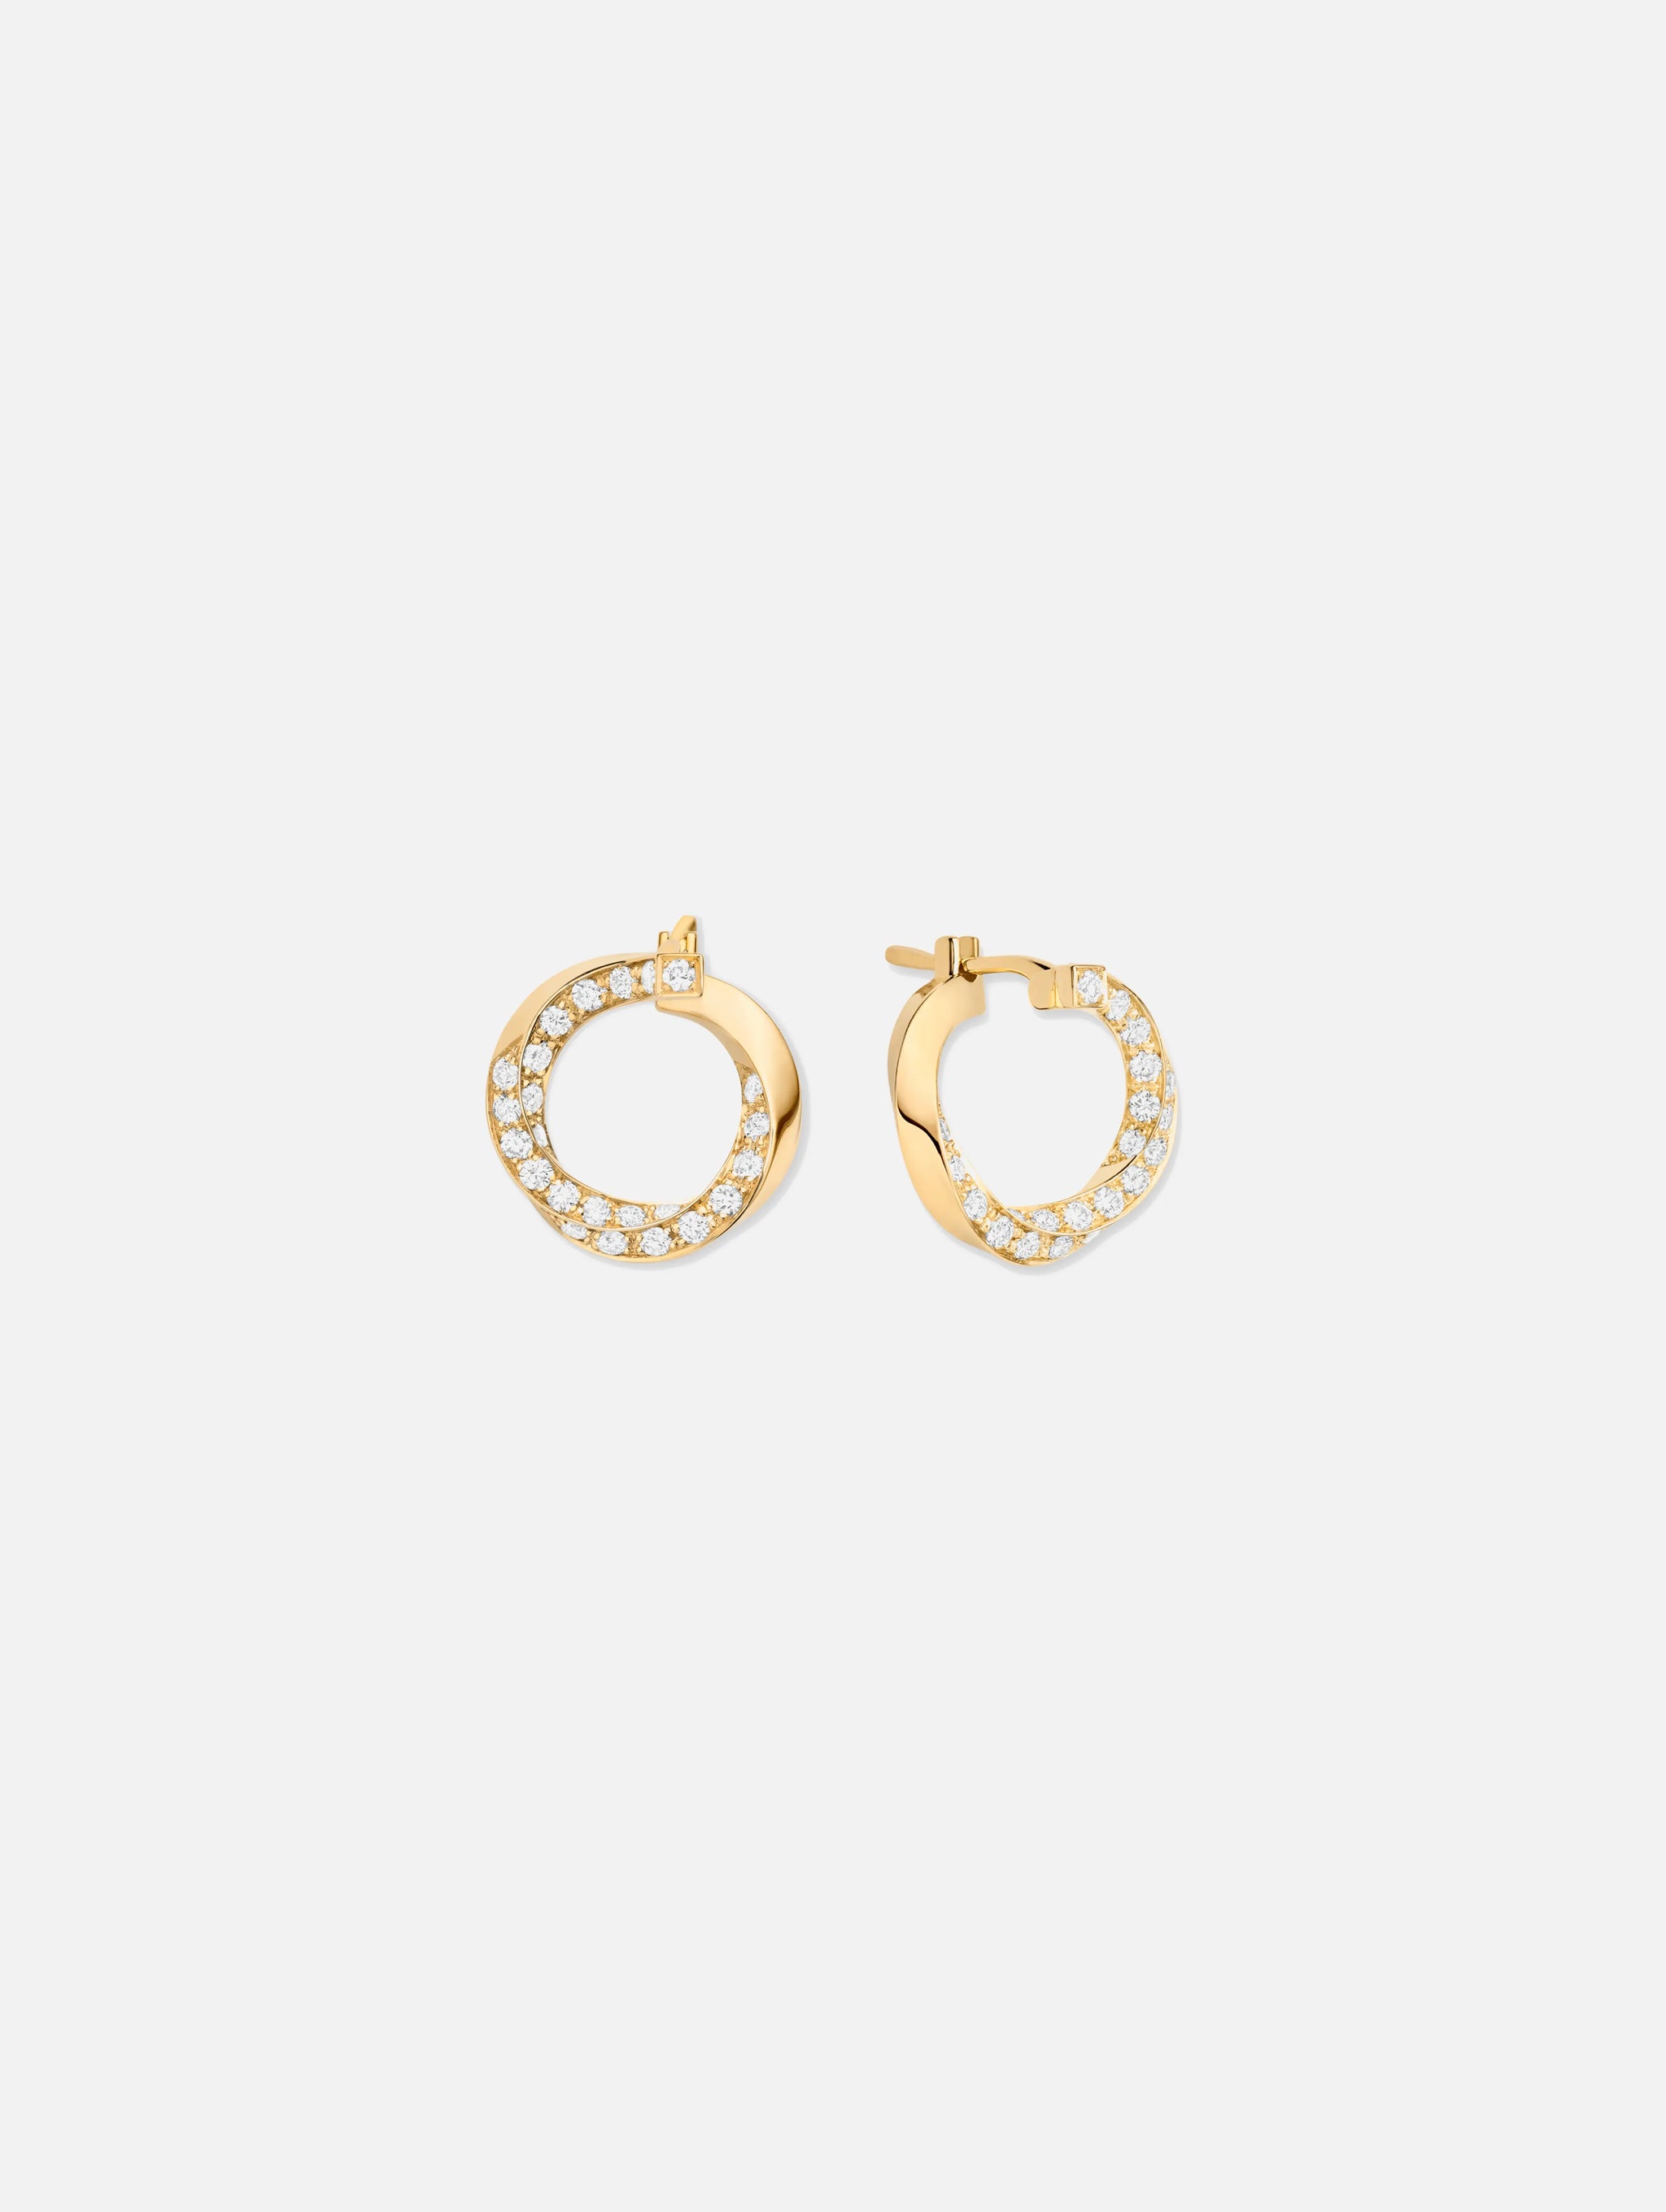 Diamond Thread Earrings in Yellow Gold - Nouvel Heritage - Nouvel Heritage